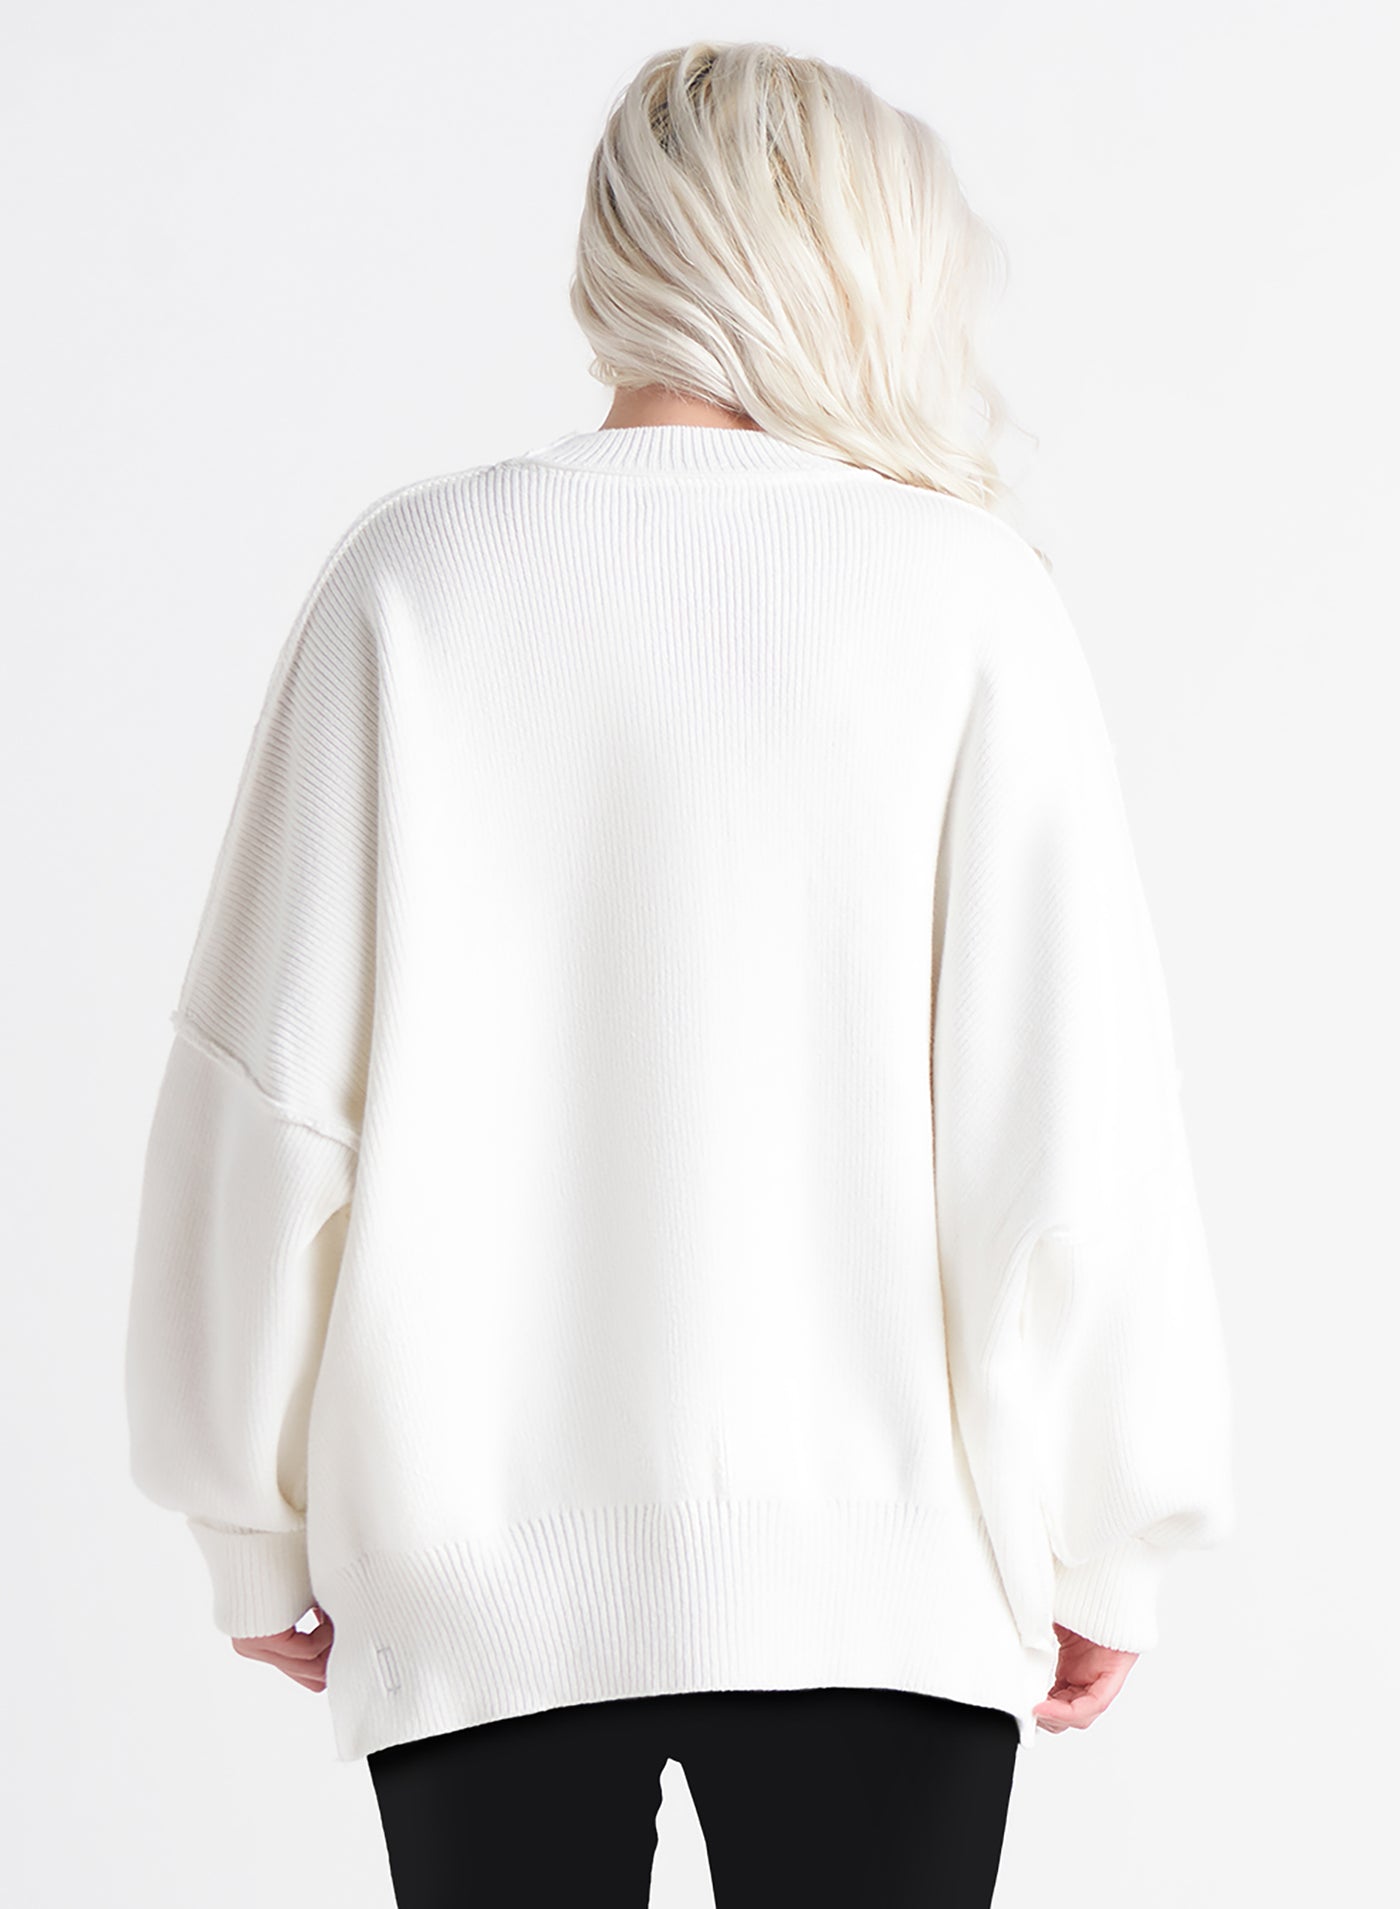 Exposed Seams Tunic Sweater (Off White)